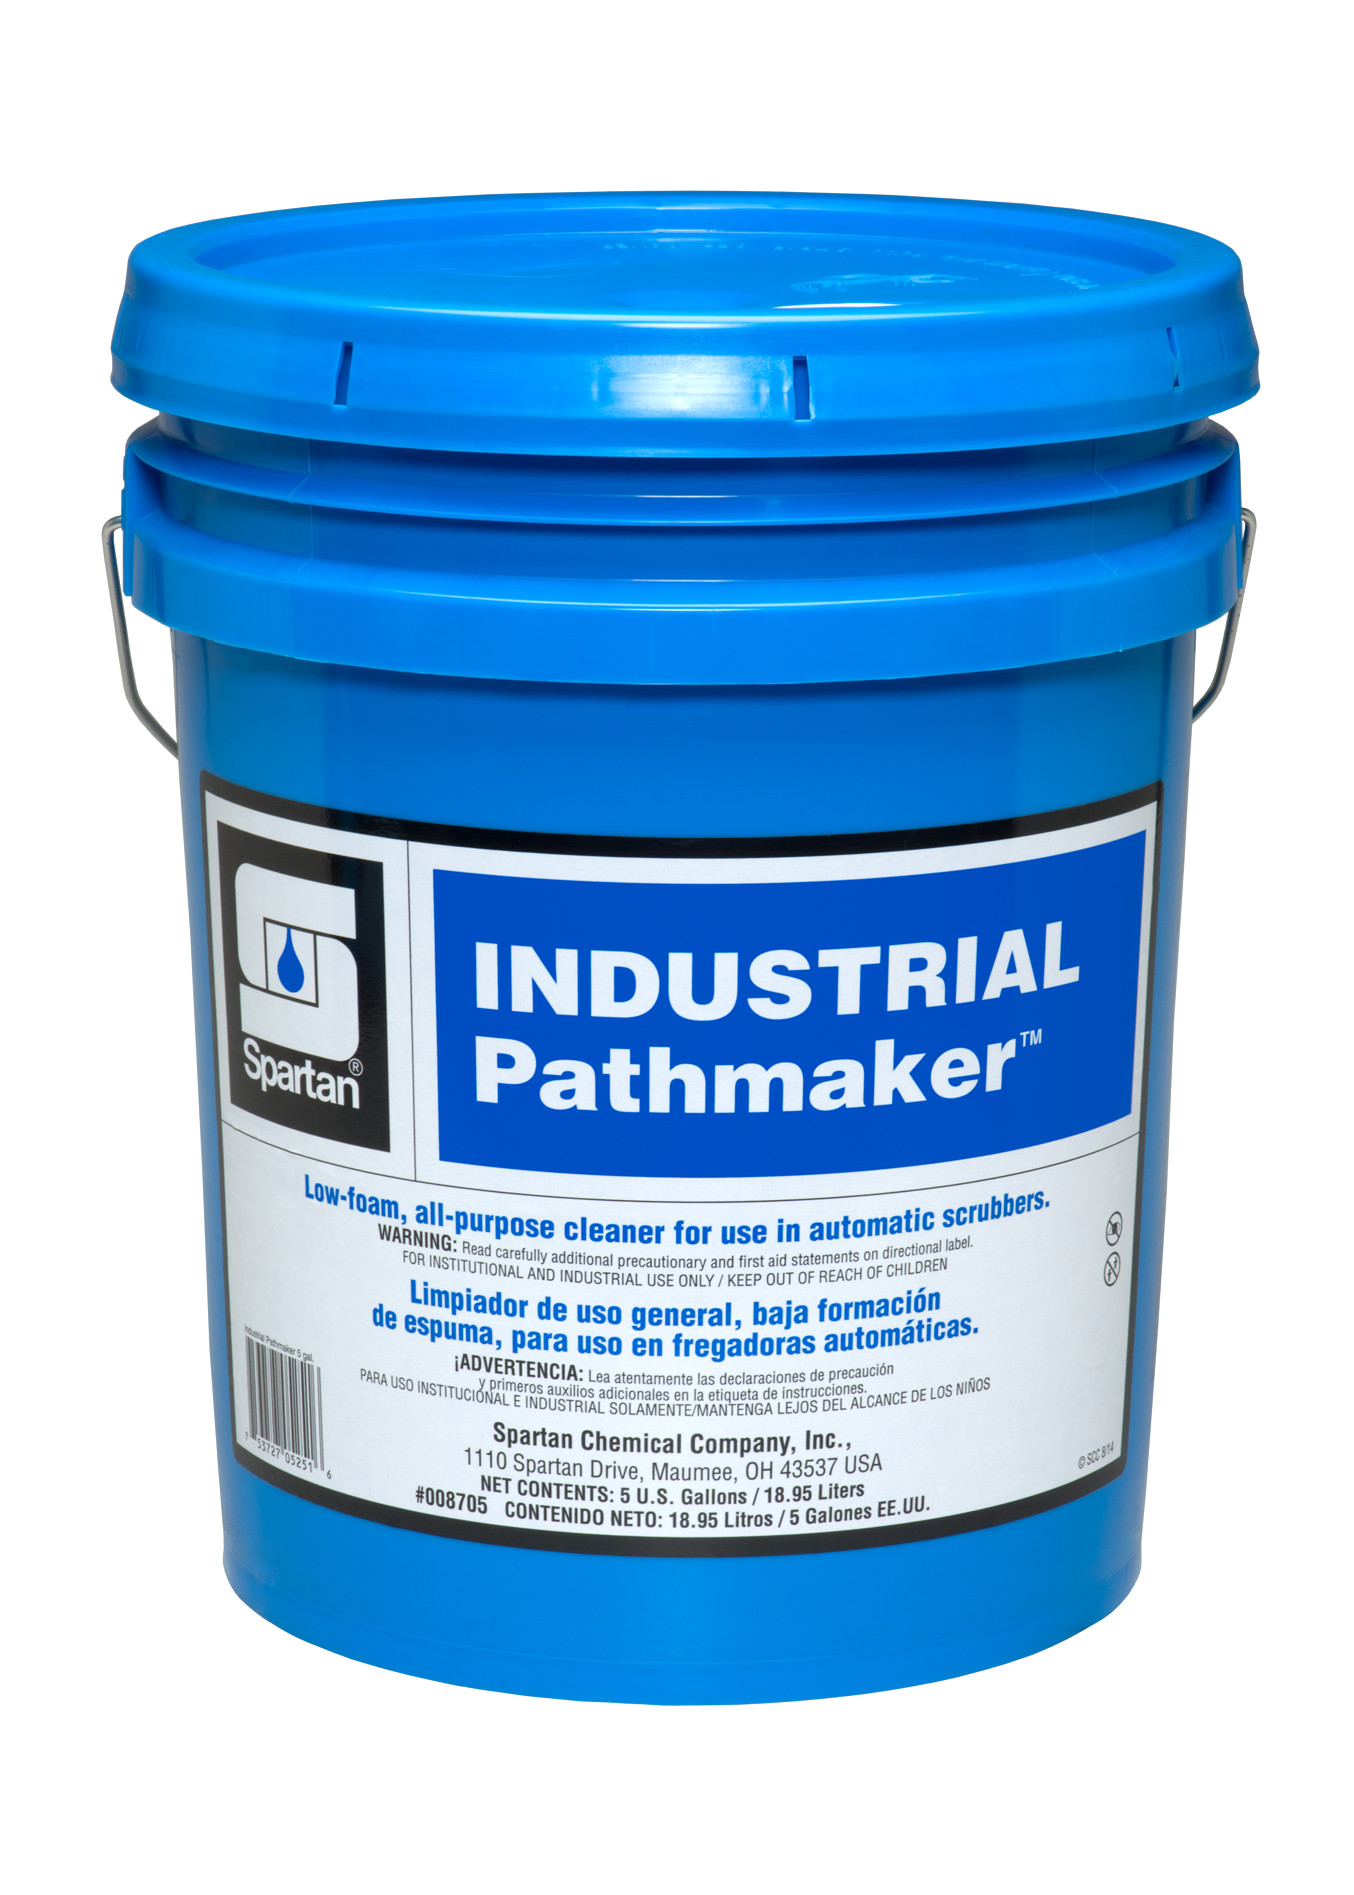 Spartan Chemical Company Industrial Pathmaker, 5 GAL PAIL